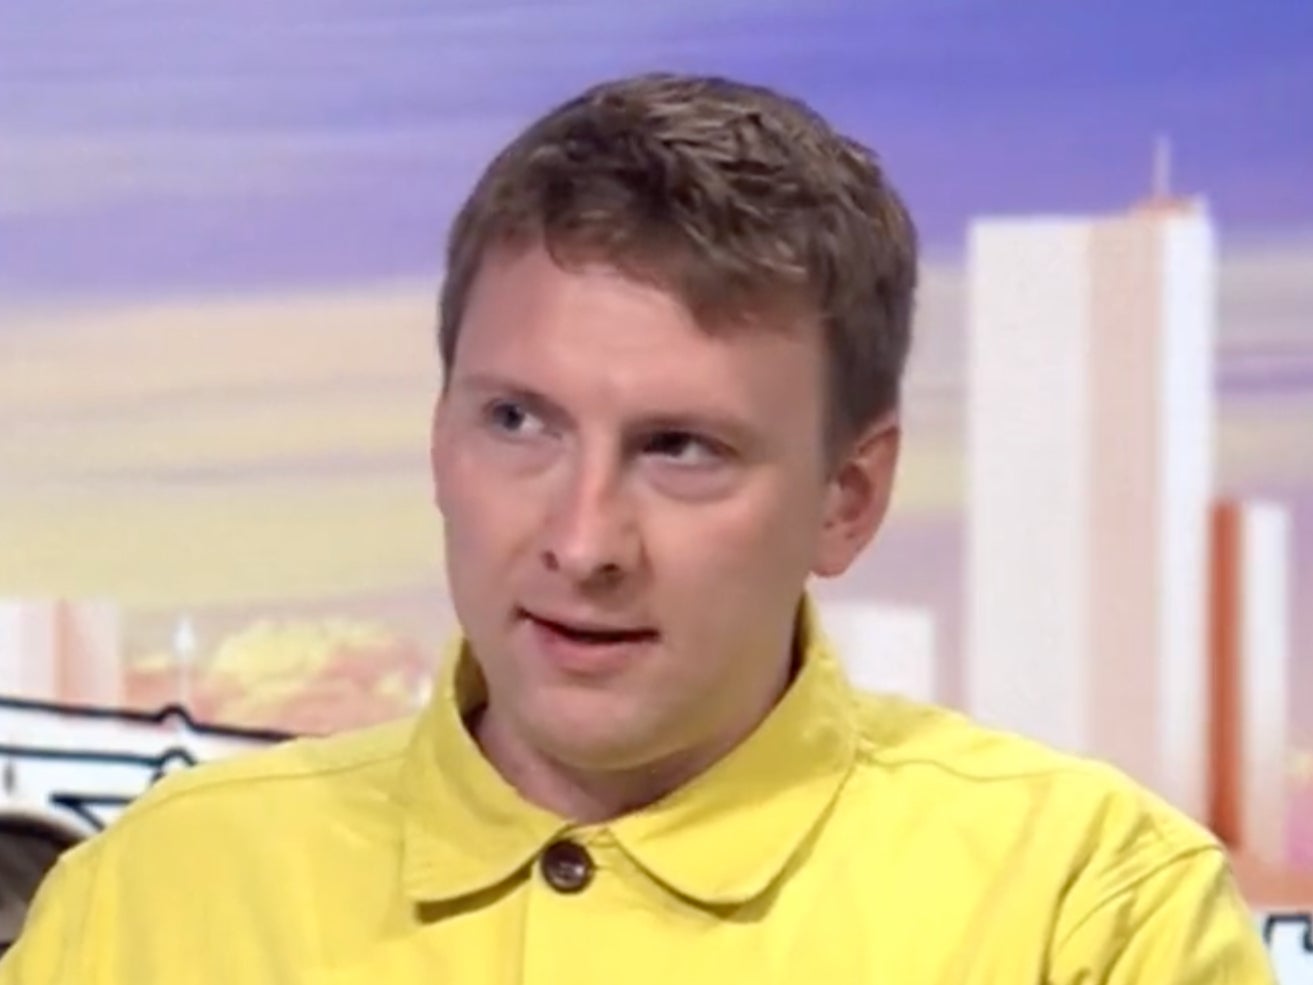 Joey Lycett pretended to be a right-wing Tory supporter on ‘Sunday with Laura Kuenssberg’